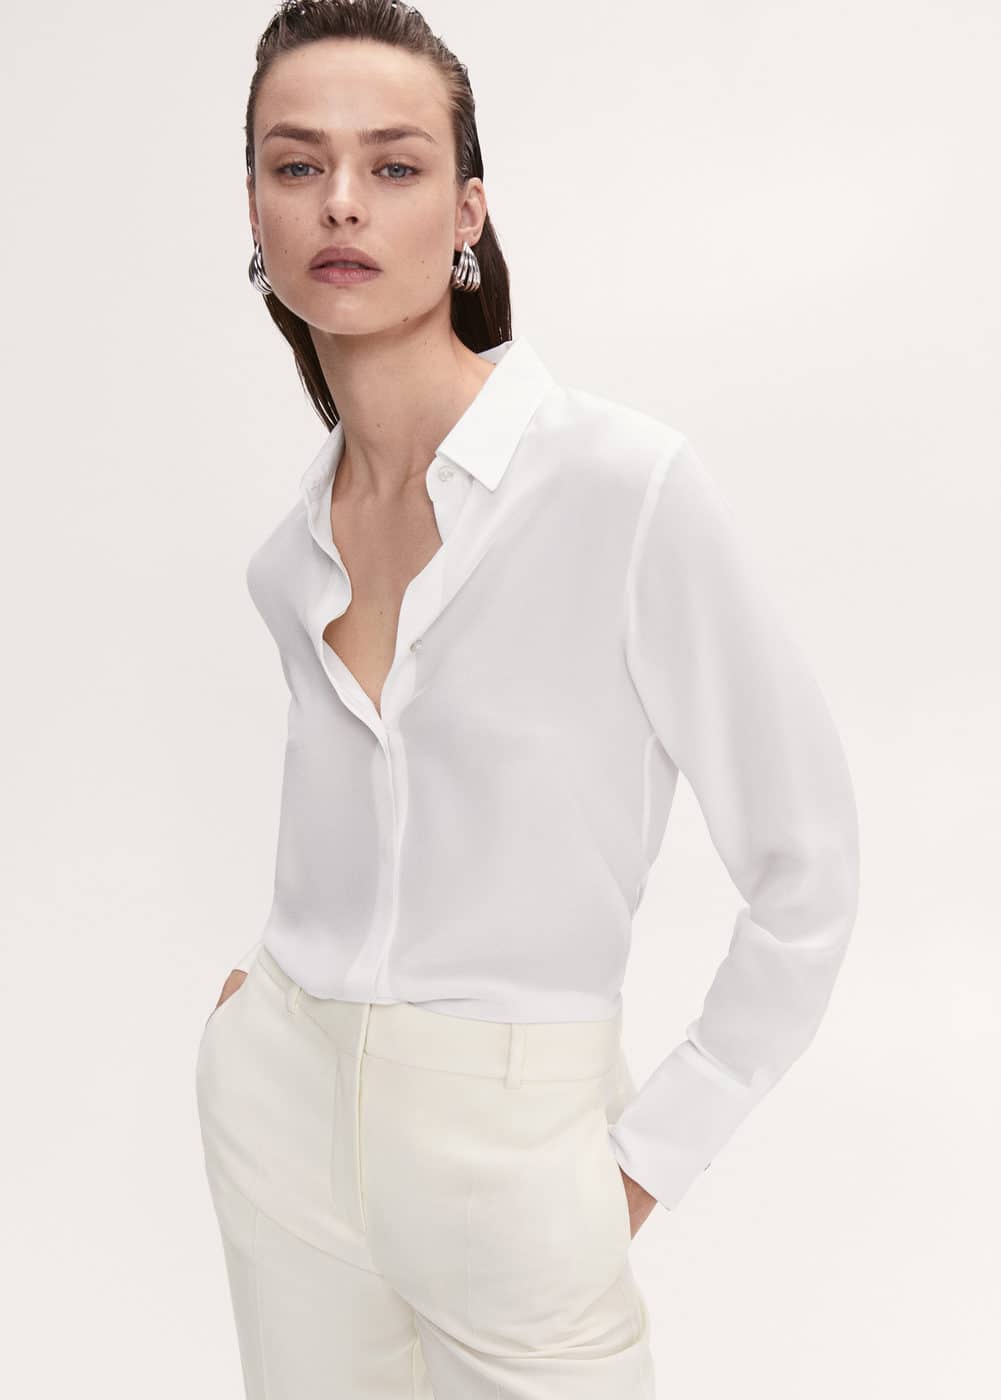 30 Workwear Buys From Zara, Mango and M&S Worth Investing In | Who What ...